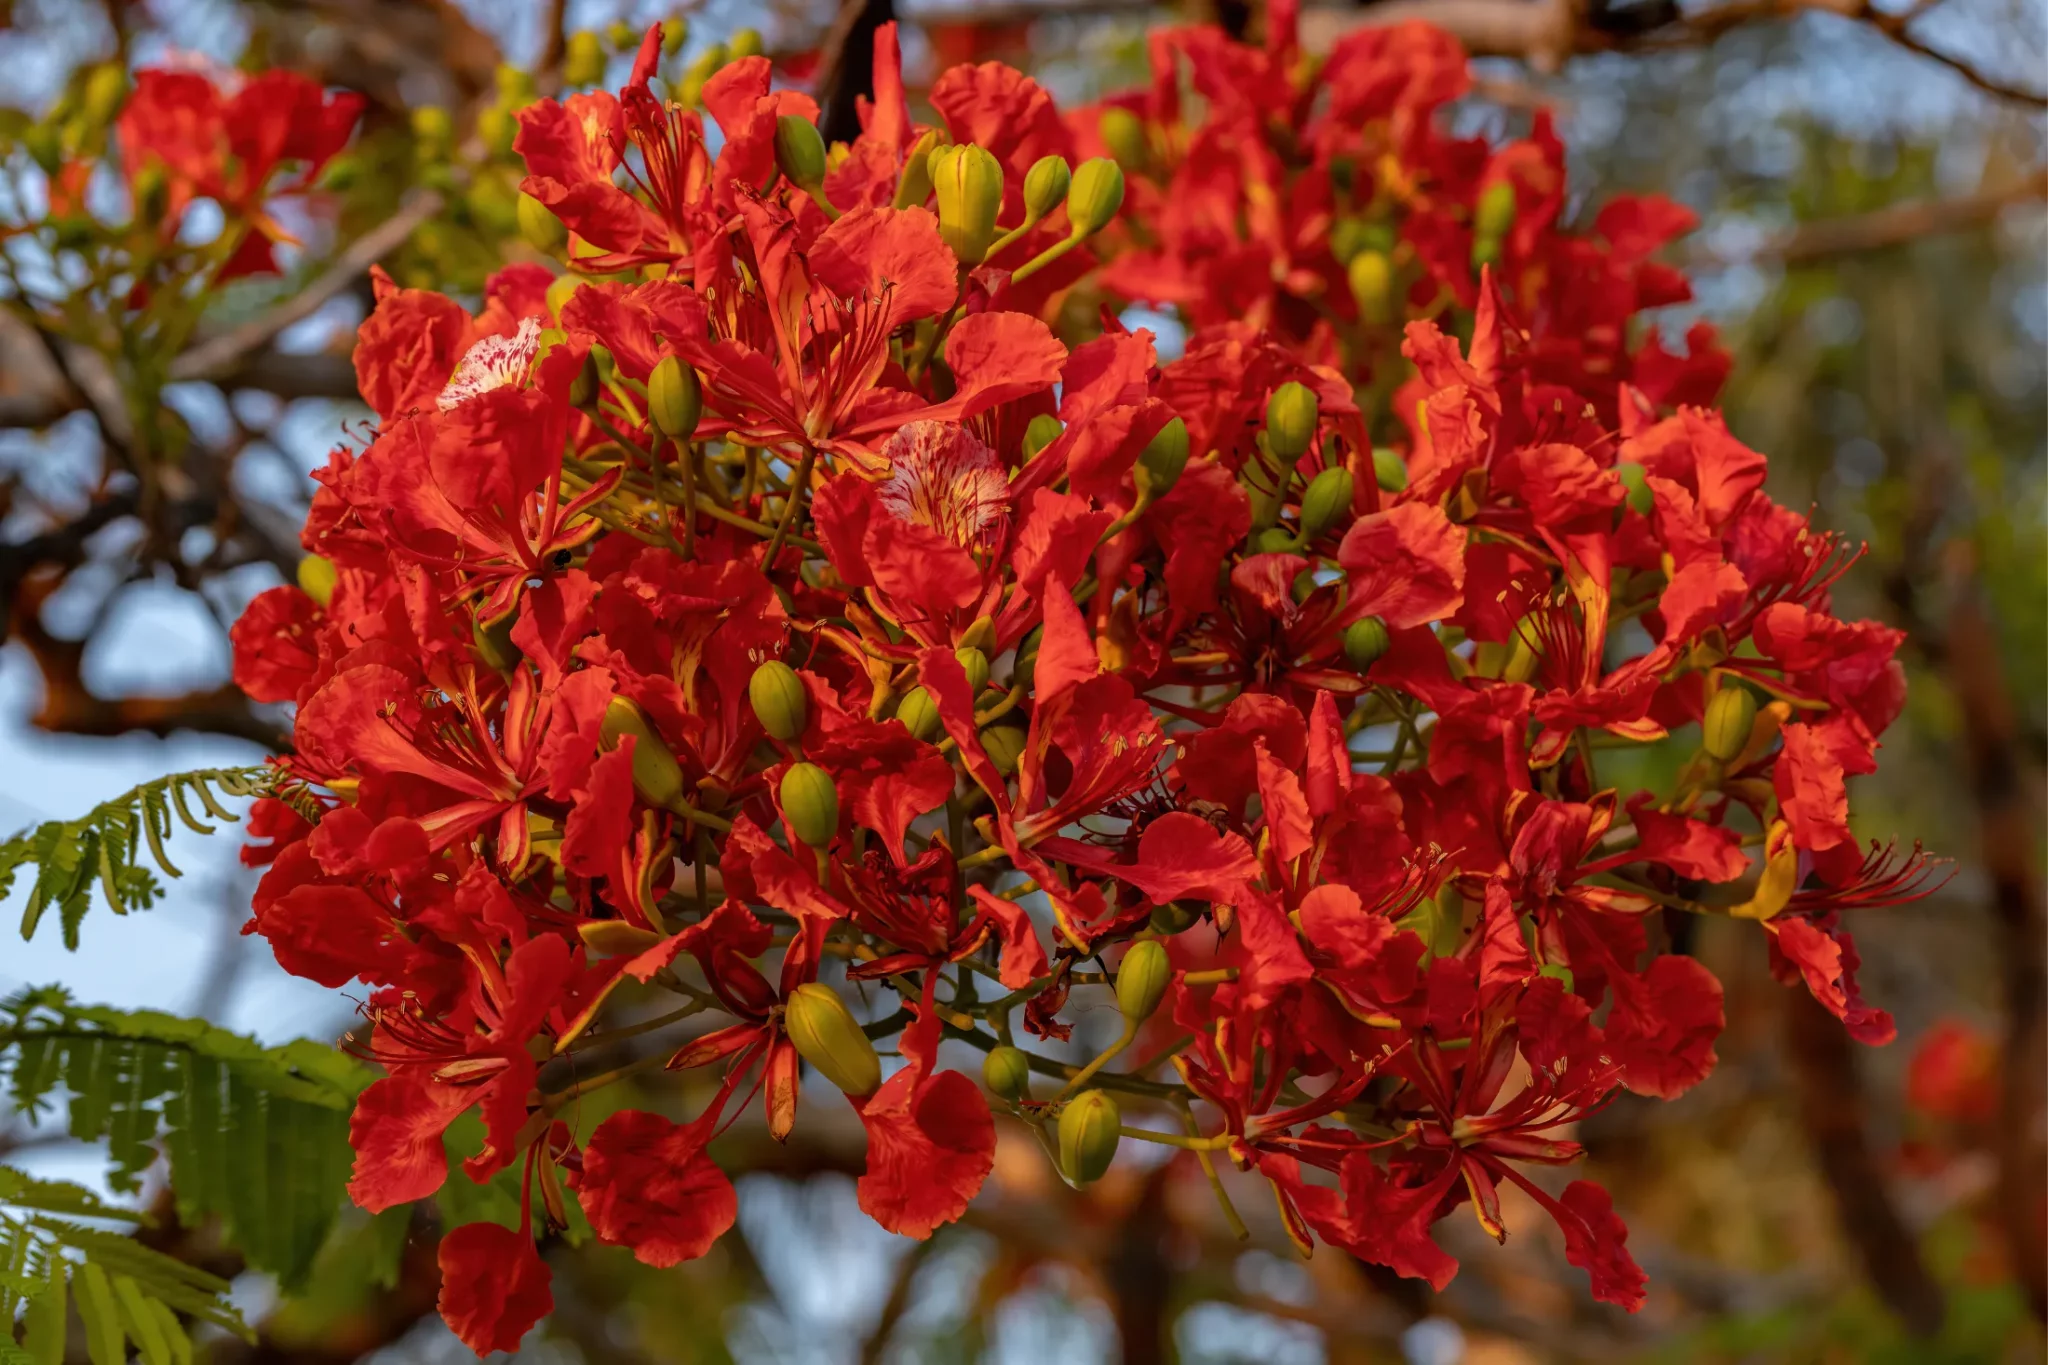 Red Flower of the Flamboyant tree of the species Delonix.